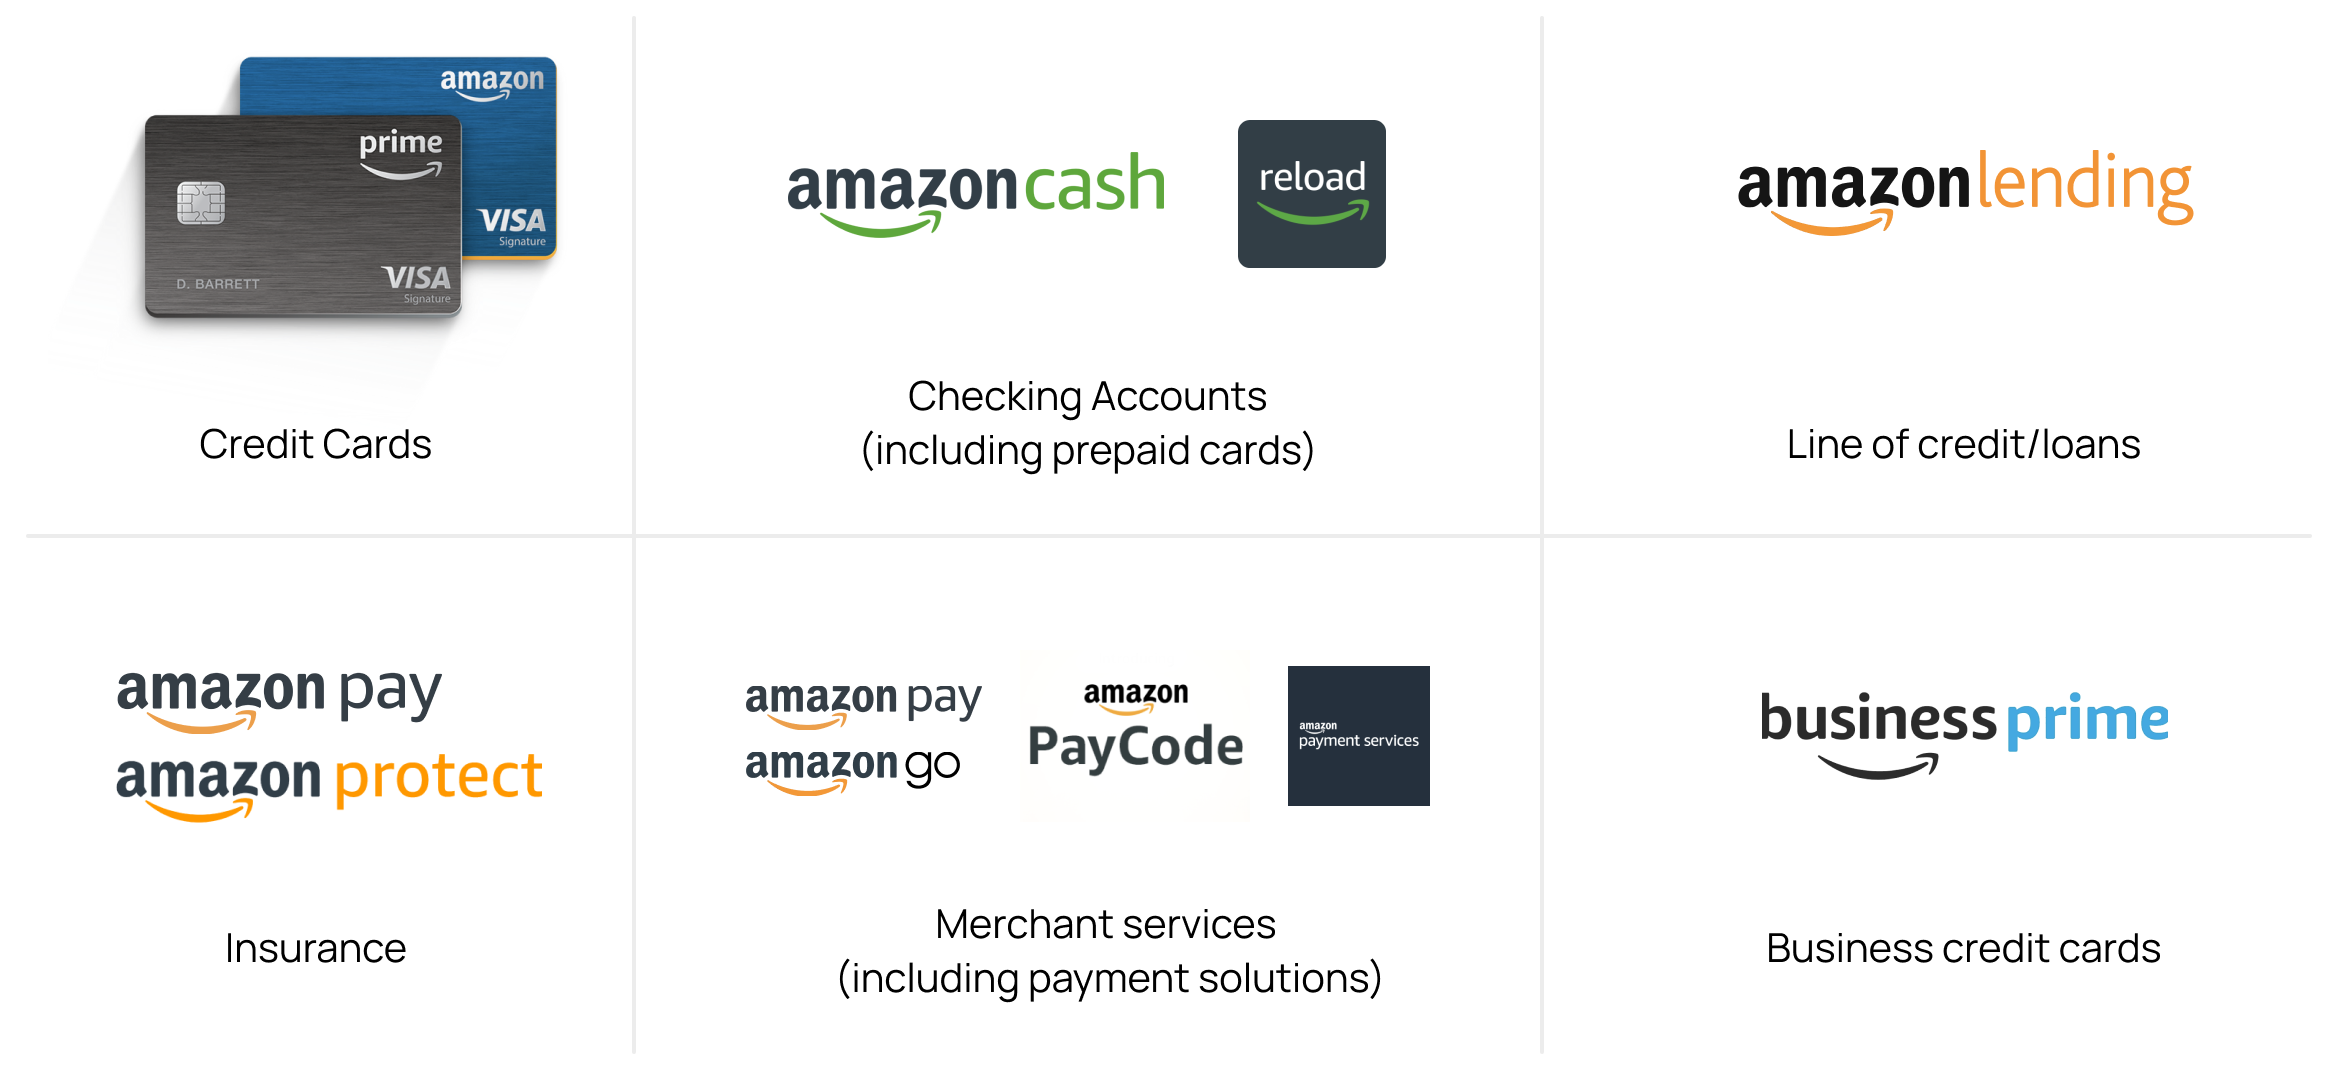 Image shows the Amazon digital banking & payment products that shows logos of Amazon cash, lending, pay, protect, and prime.